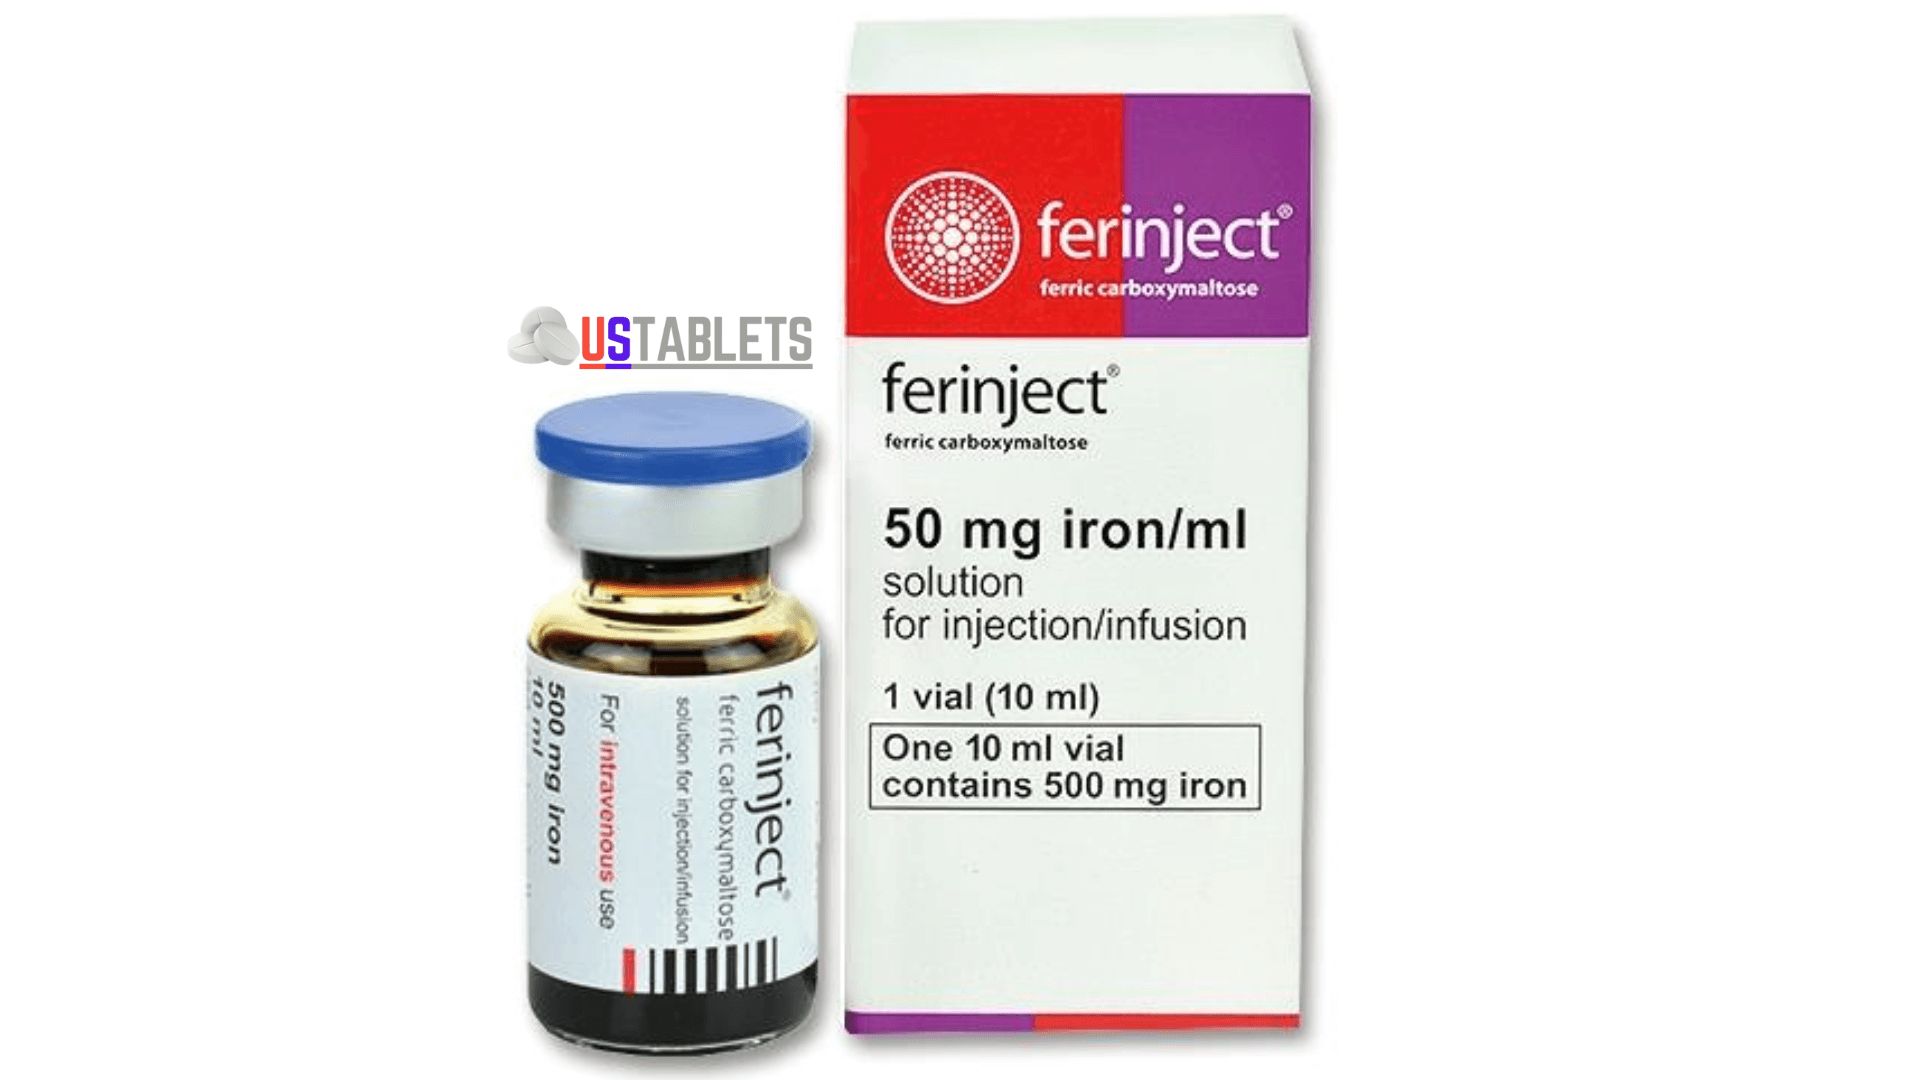 Ferinject Injection I Uses, Side Effects, Price & Easily Available